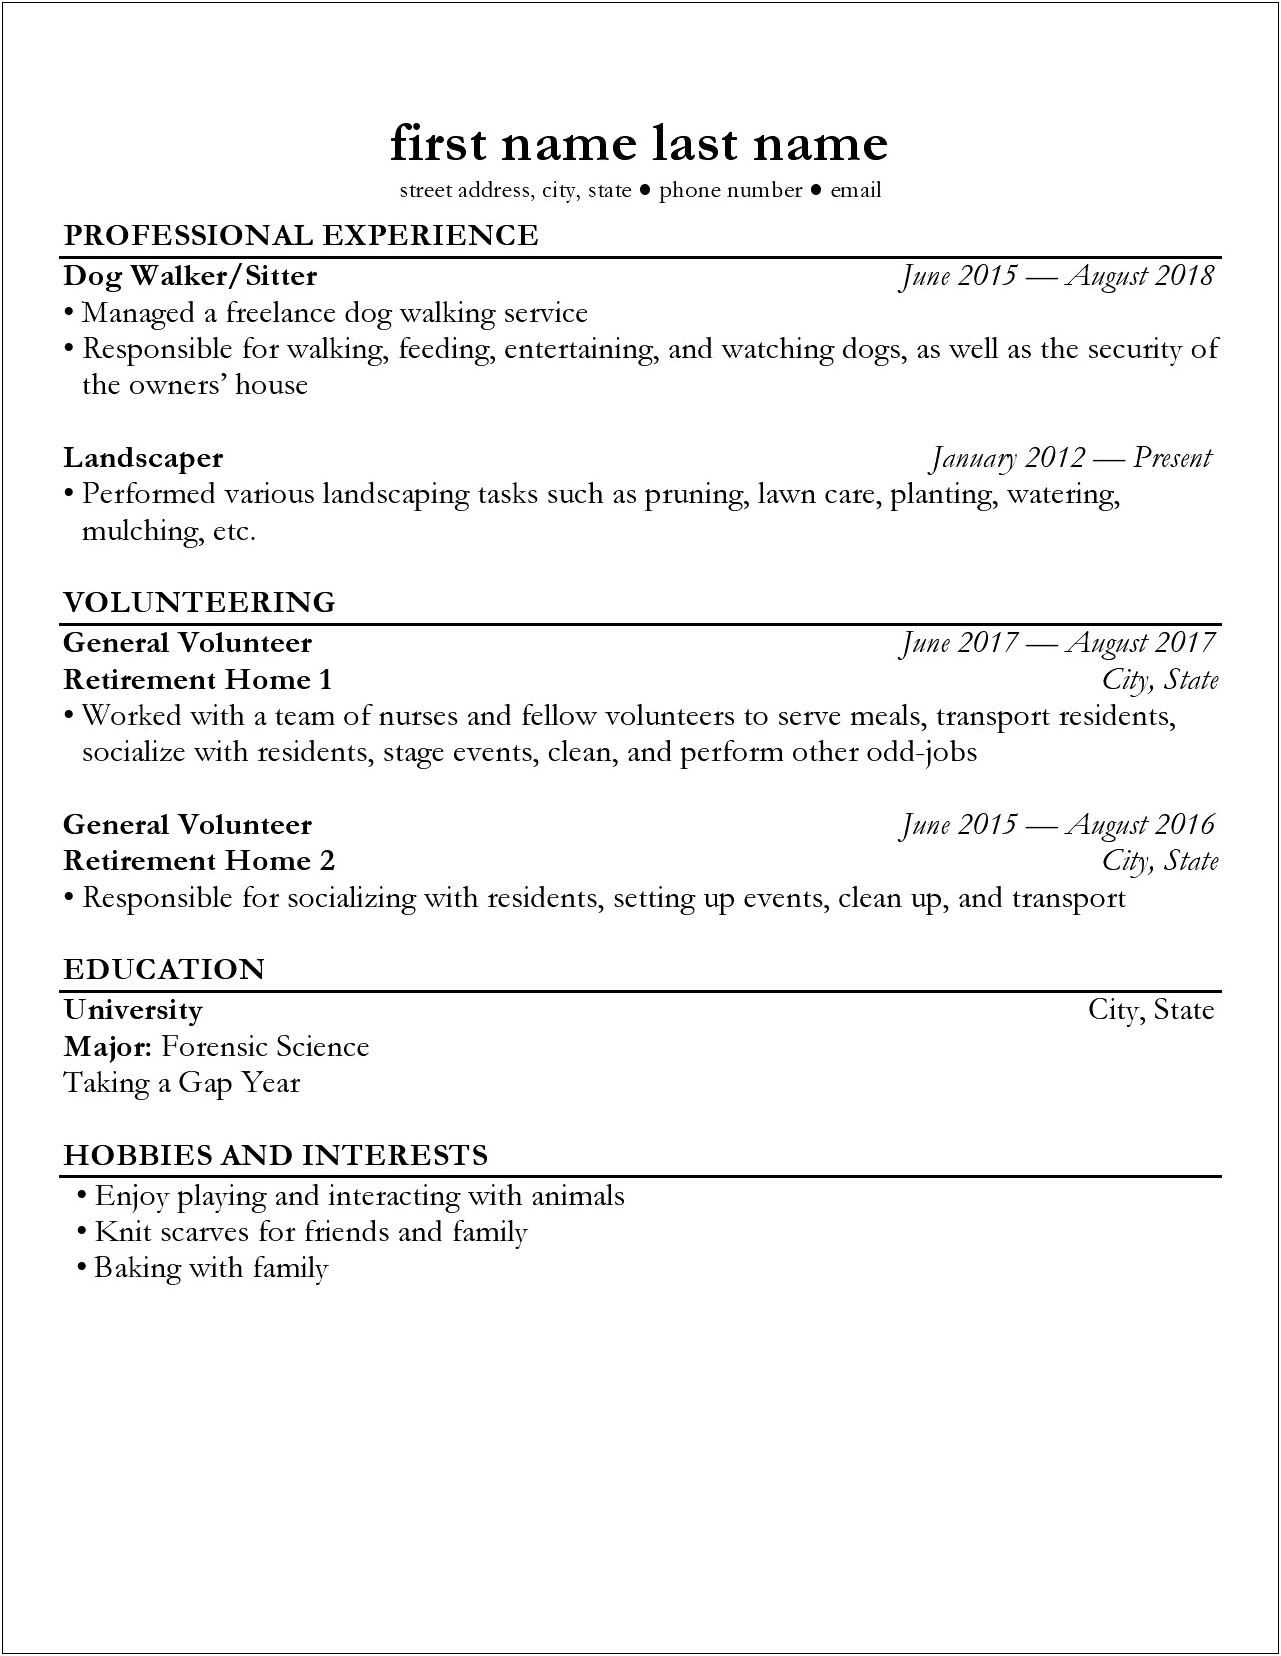 Can't Find Job Aytipcal On Resume